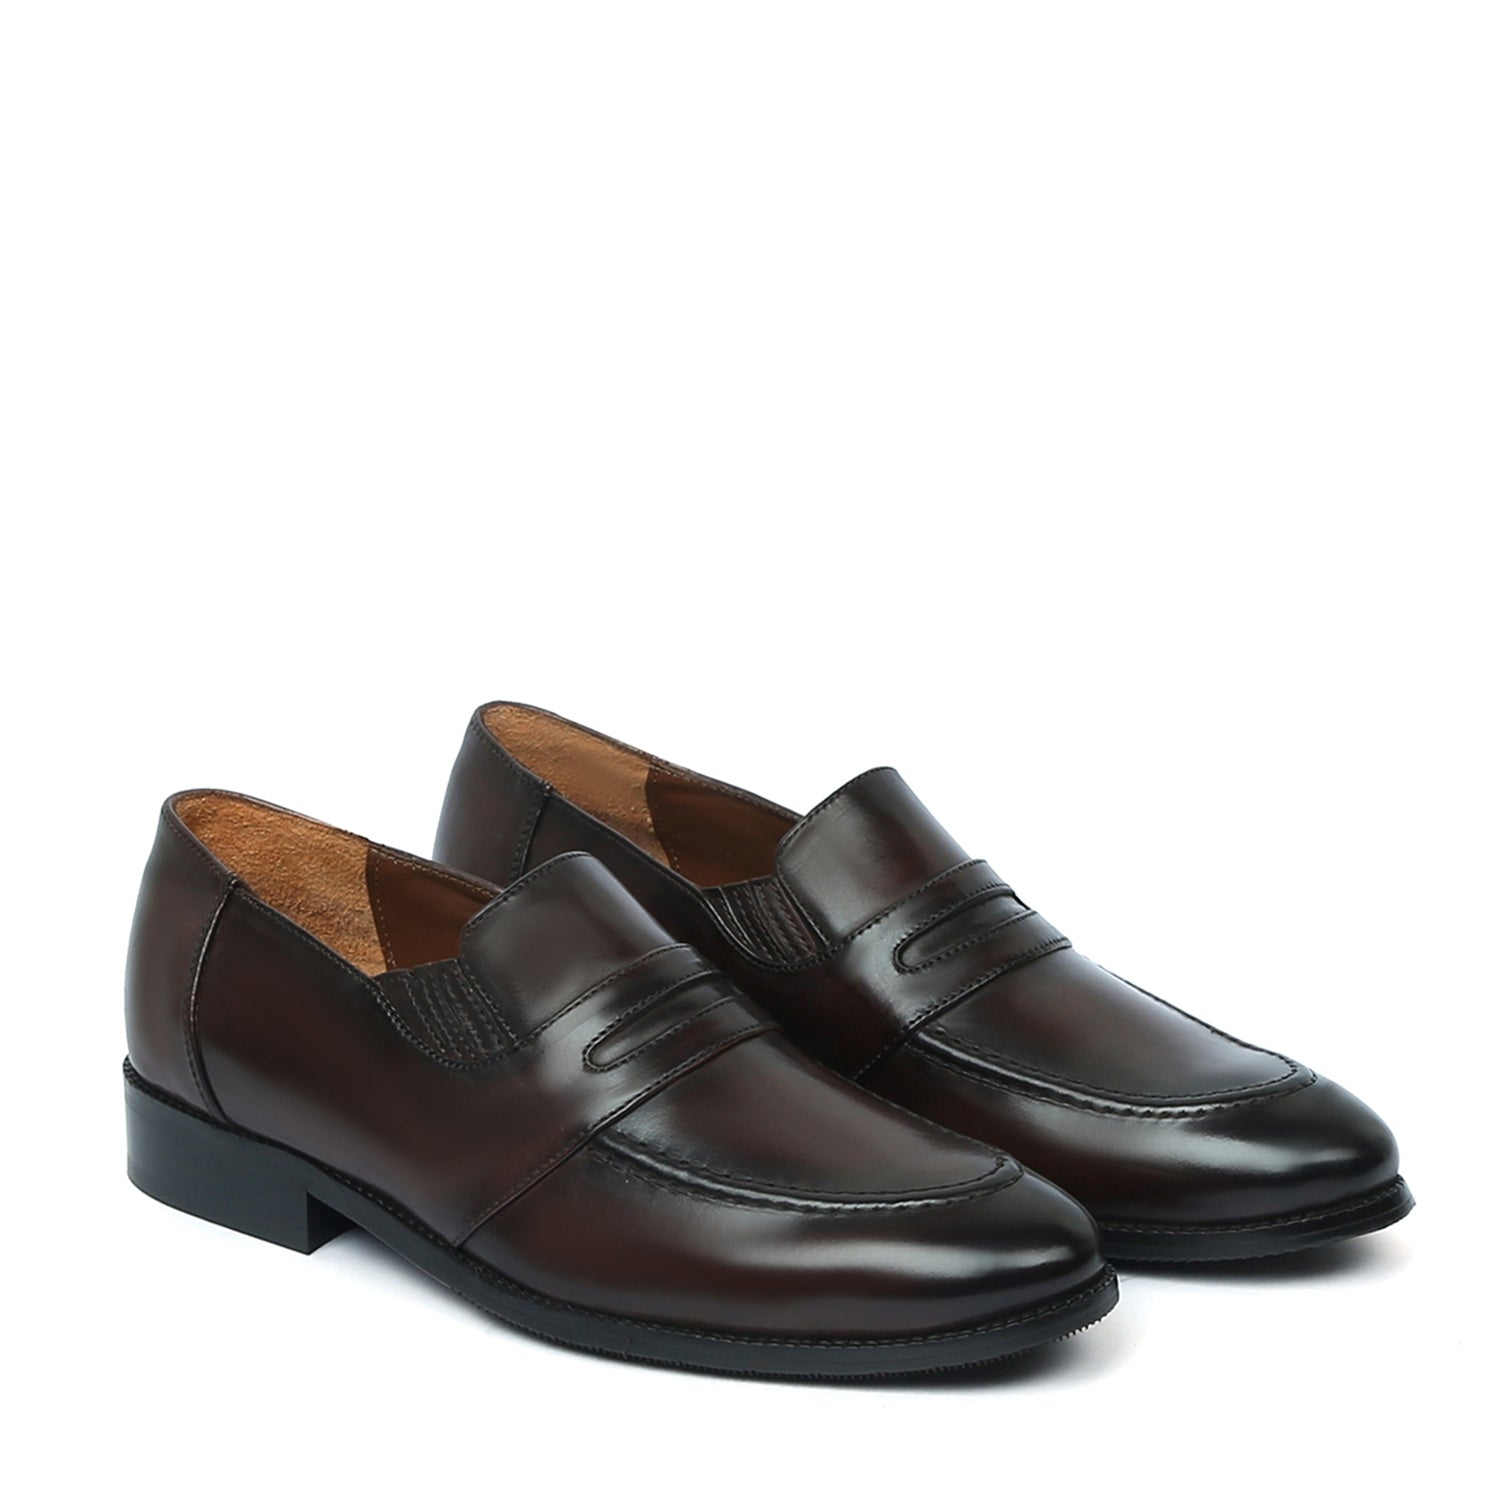 Burnished Dark Brown Penny Loafers in Genuine Leather